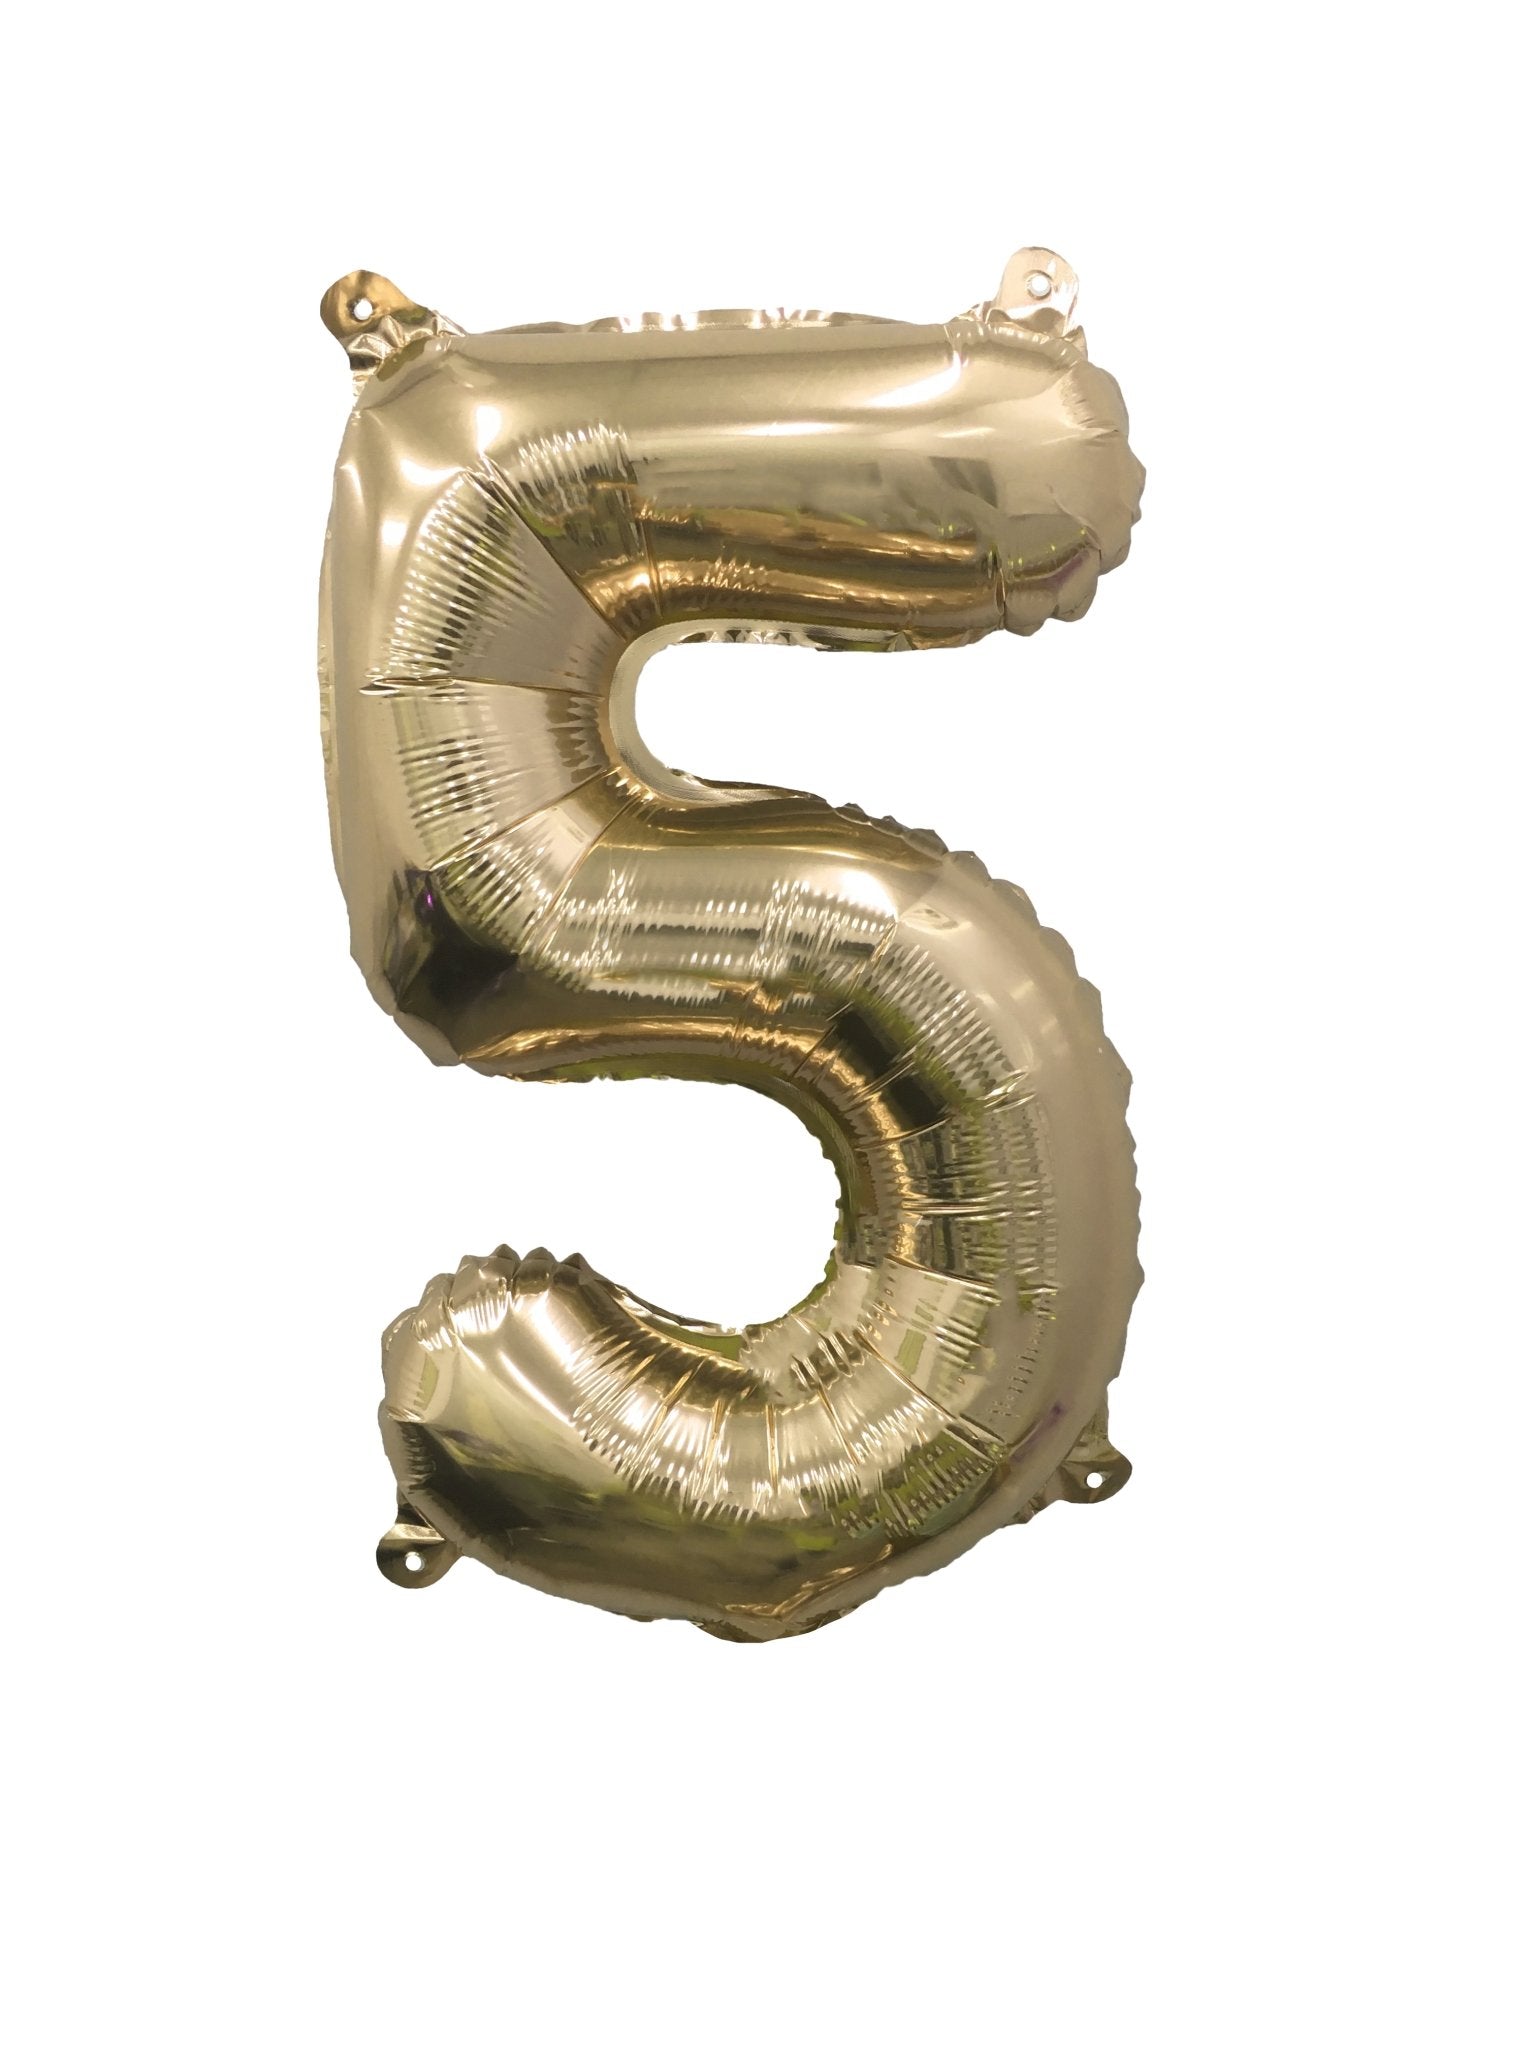 Buy Number 24 GIANT Gold Balloons 24th Birthday Balloons Online in